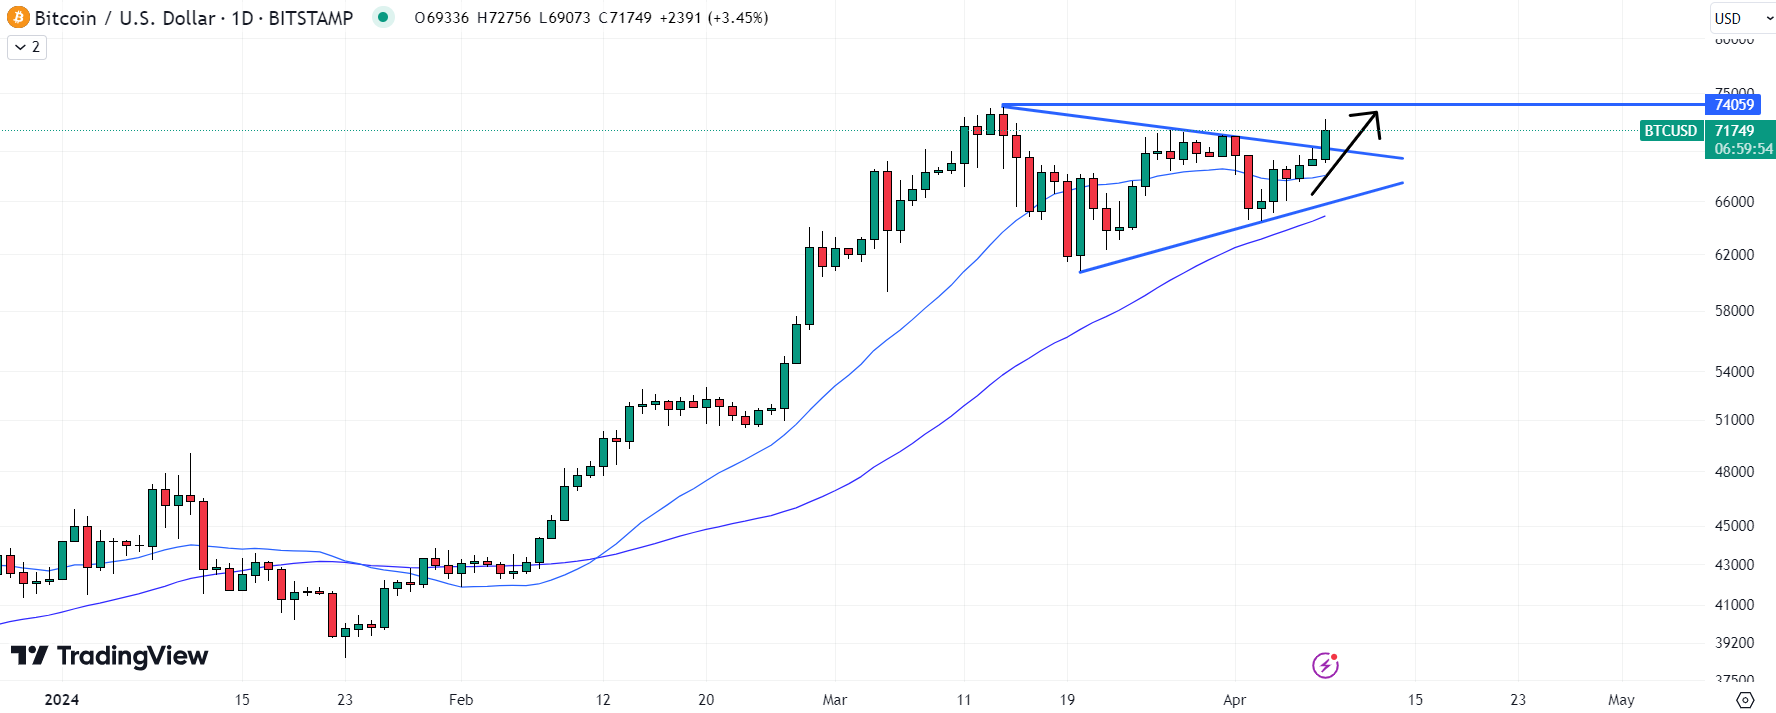 Bitcoin could be about to fly higher to $80,000, making it a candidate for best crypto to buy now. Source: TradingView